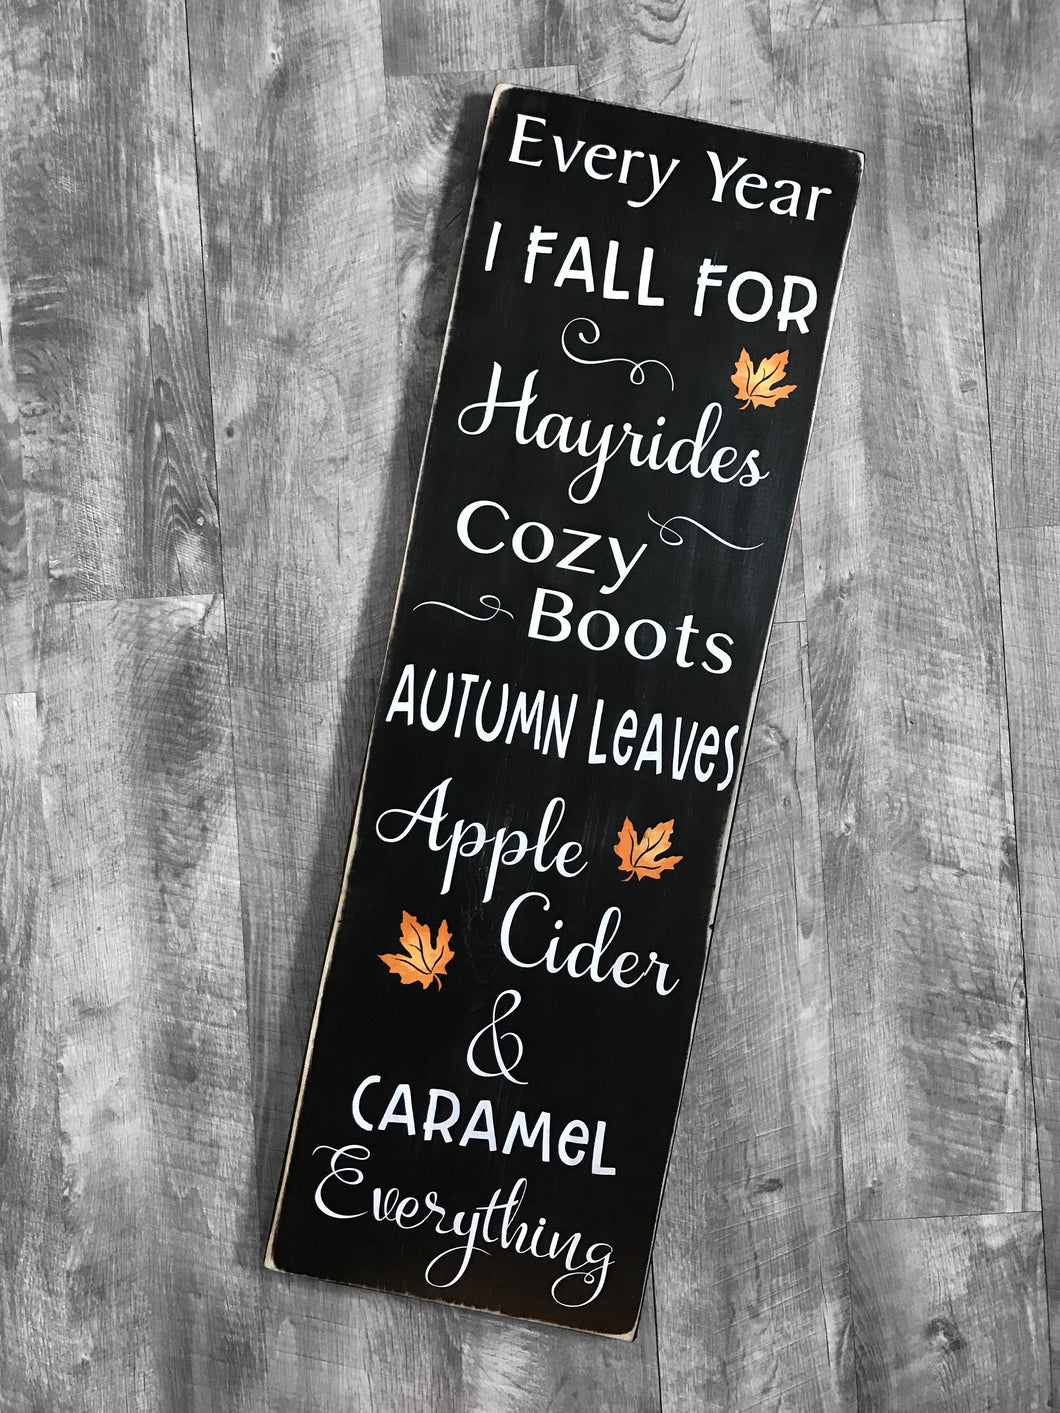 Reversible Winter & Fall Indoor/Outdoor Wood Hand Painted Sign, Holiday, Pumpkins, Bonfires, Smores, Snowflakes, Mittens and Hot chocolate!